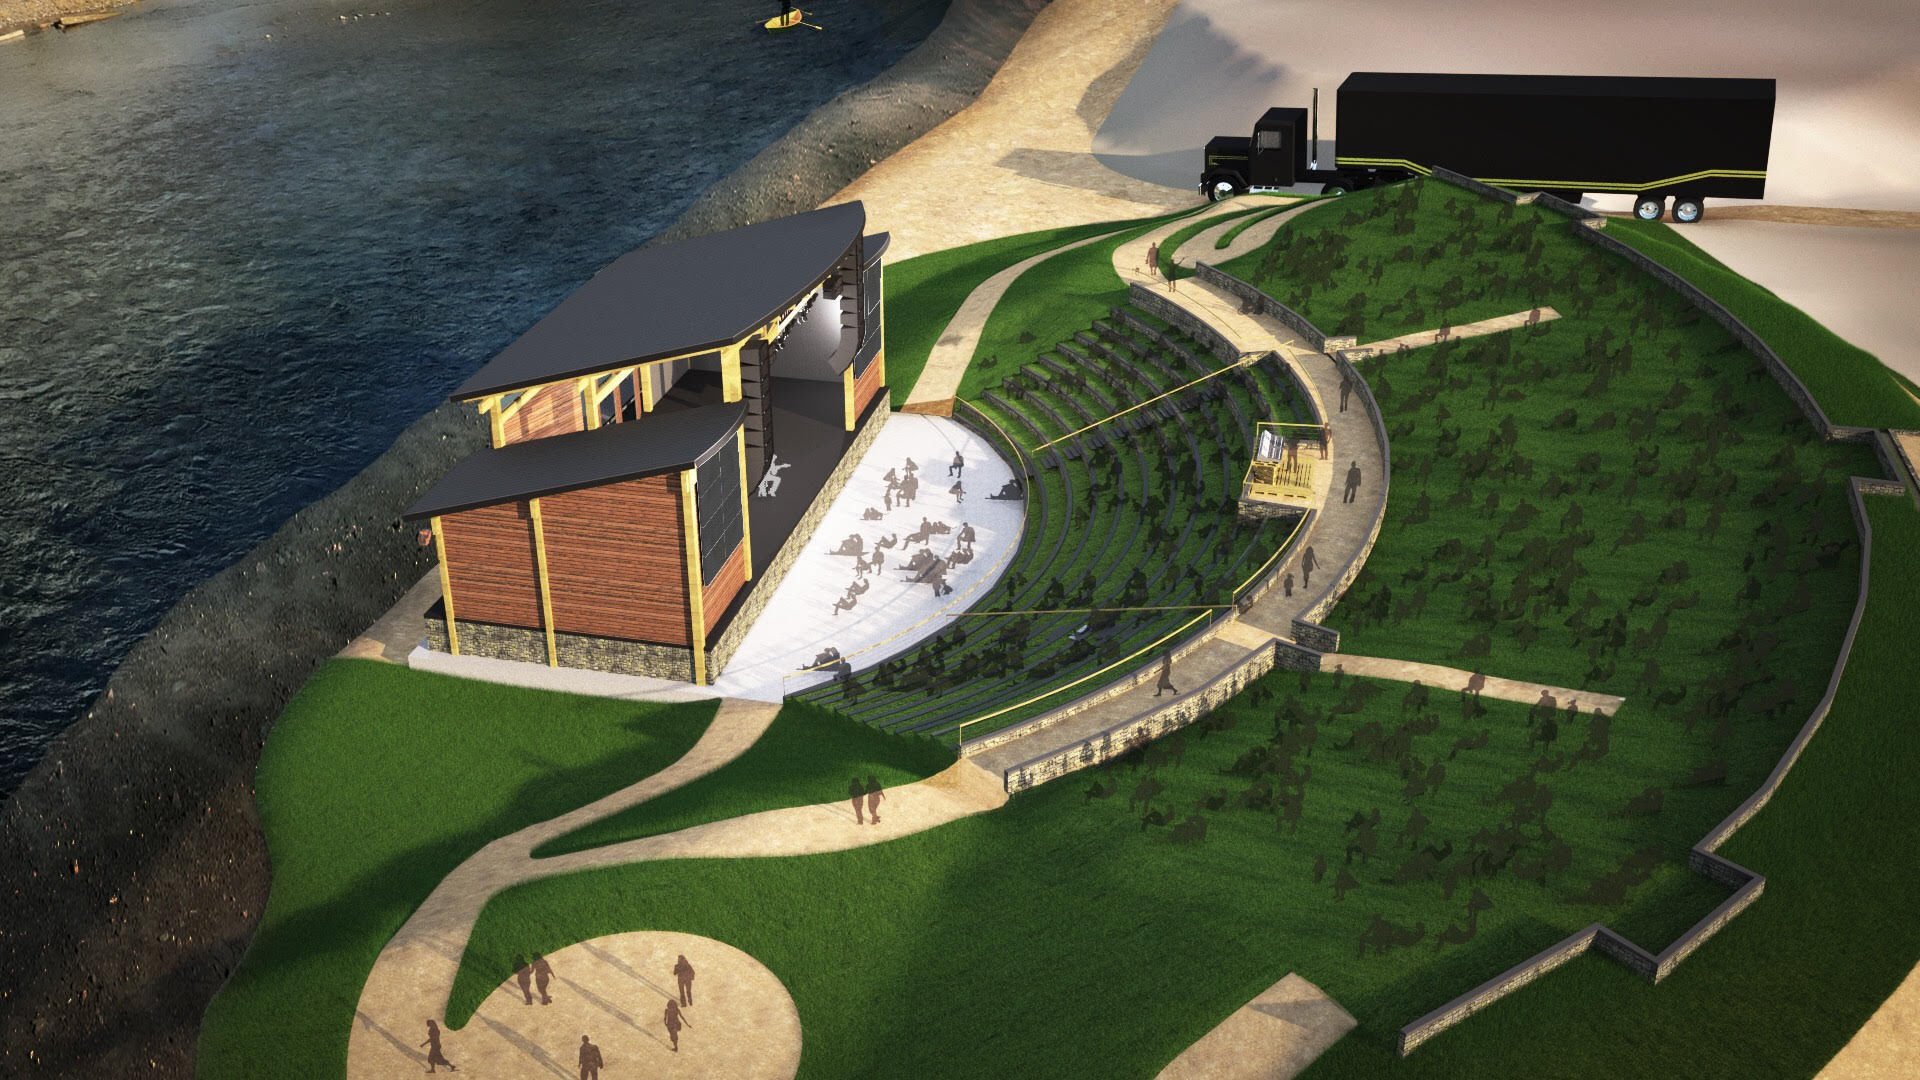 KettleHouse, Wilma to build 4,000-seat amphitheater for ...